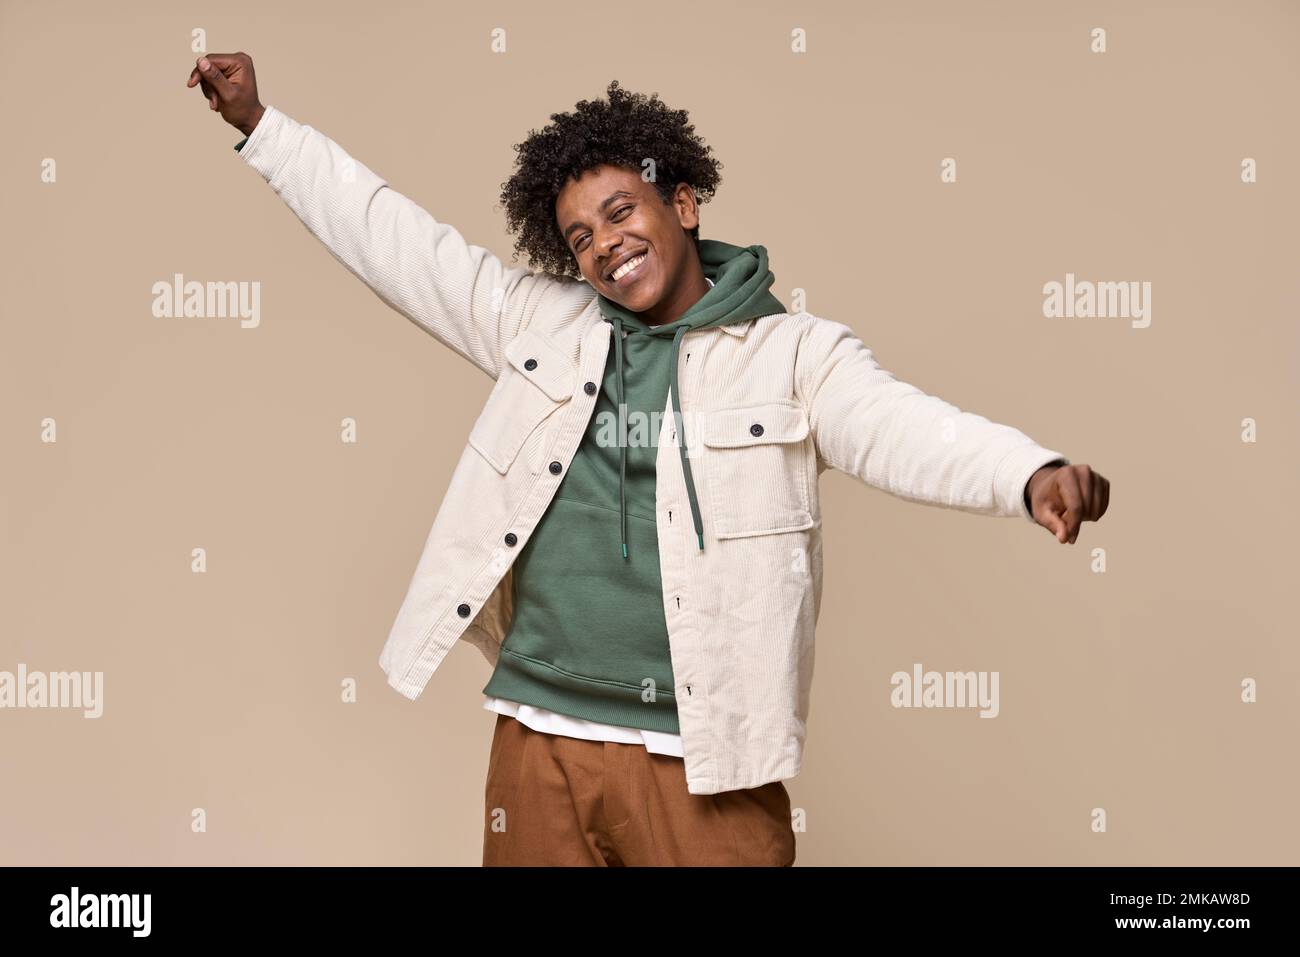 Funky happy African gen z teenager dancing isolated on beige background. Stock Photo